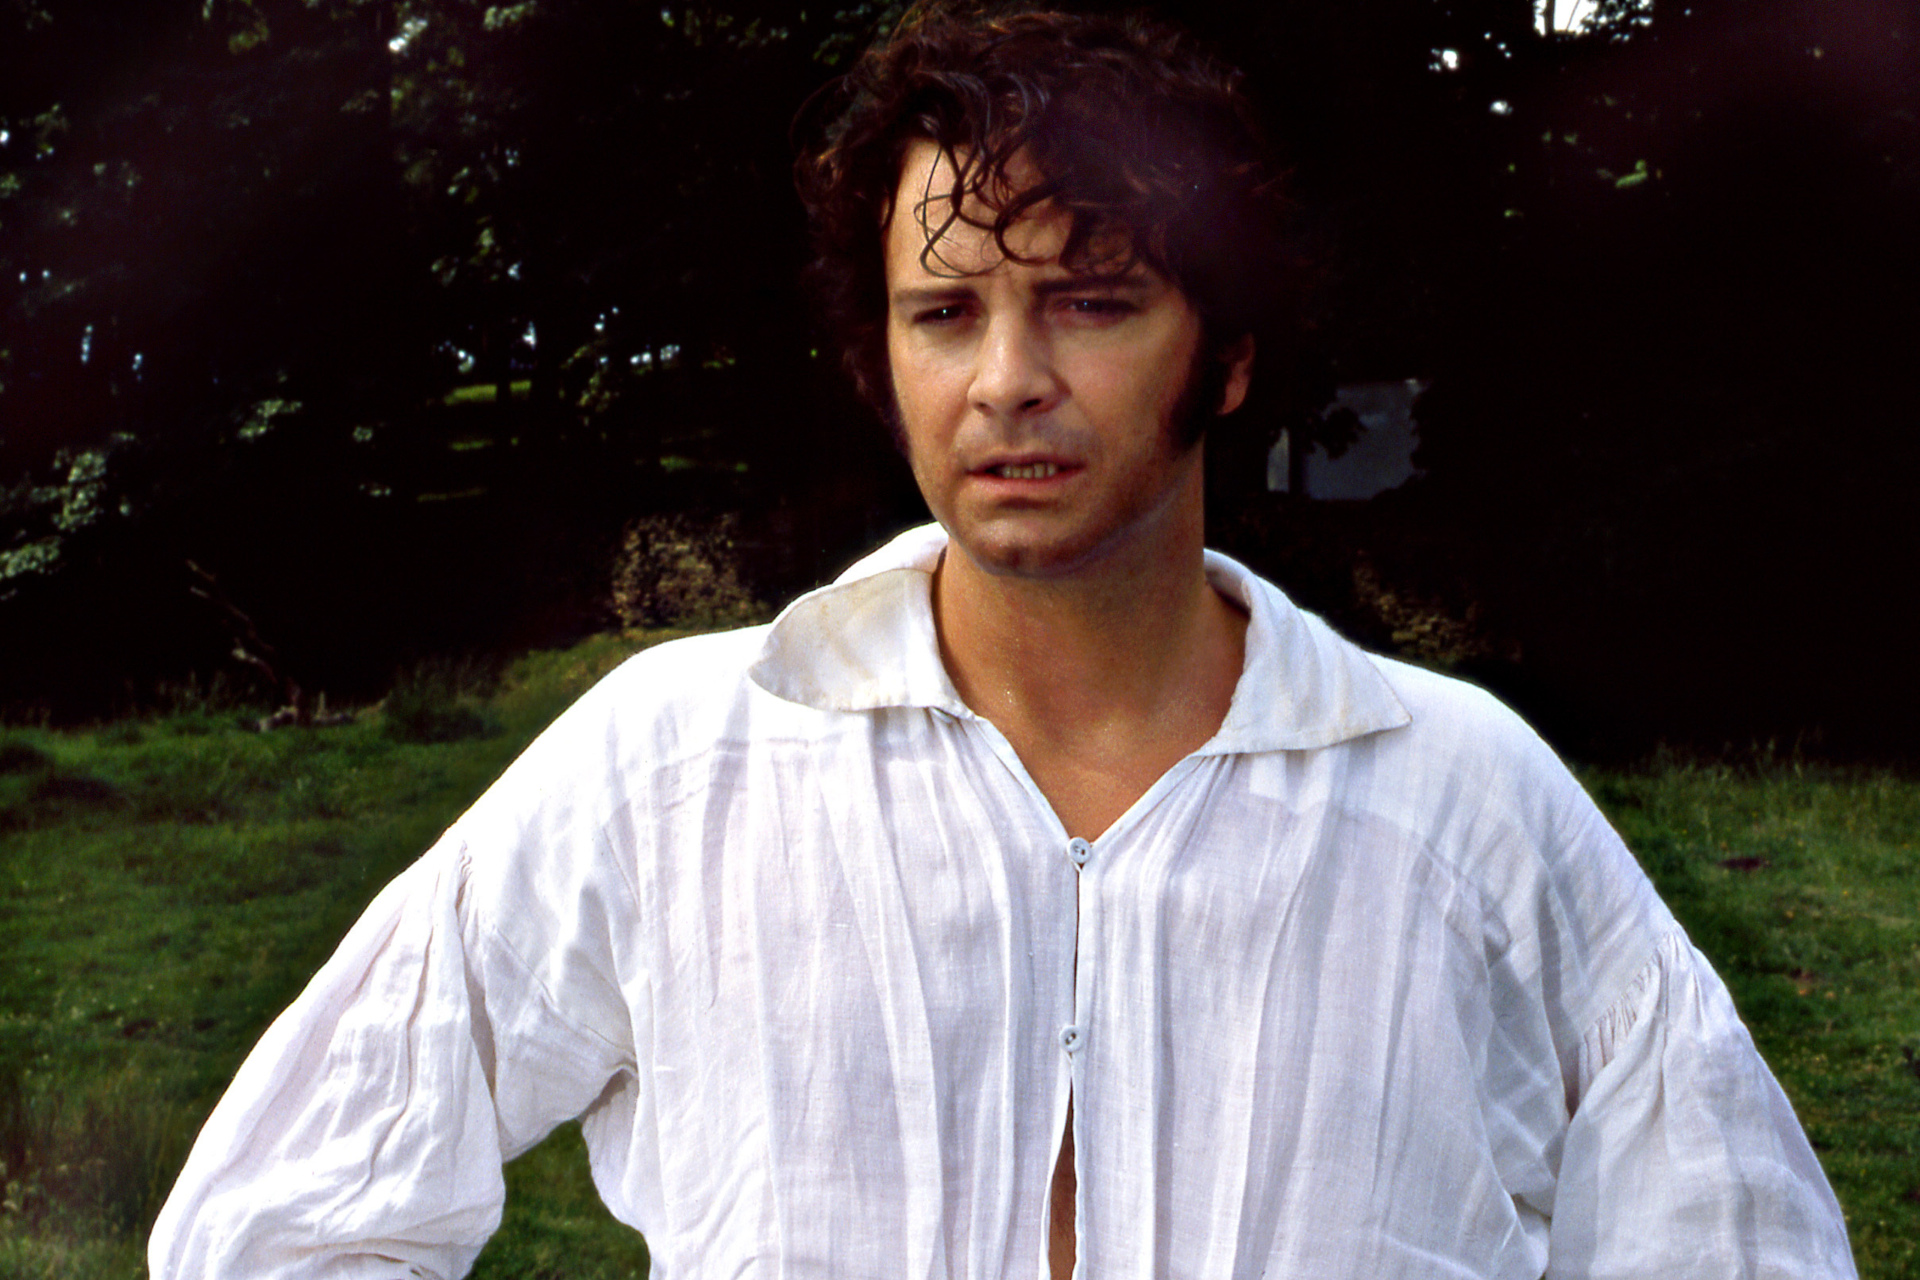 Colin Firth as Mr Darcy in the six-part BBC adaptation of the Jane Austen novel 'Pride and Prejudice', 1995.